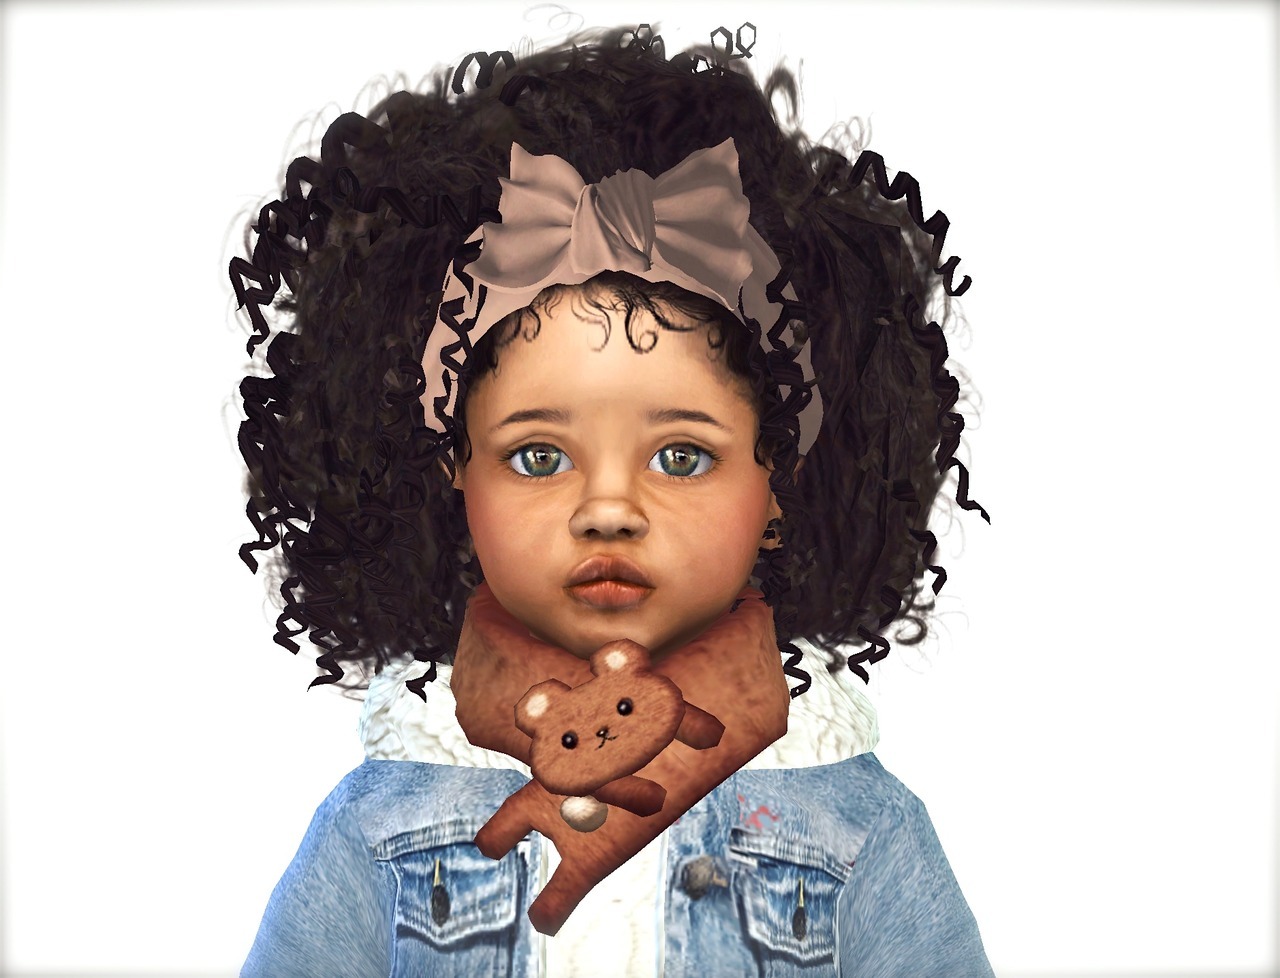 sims 4 child and toddler skin overlay